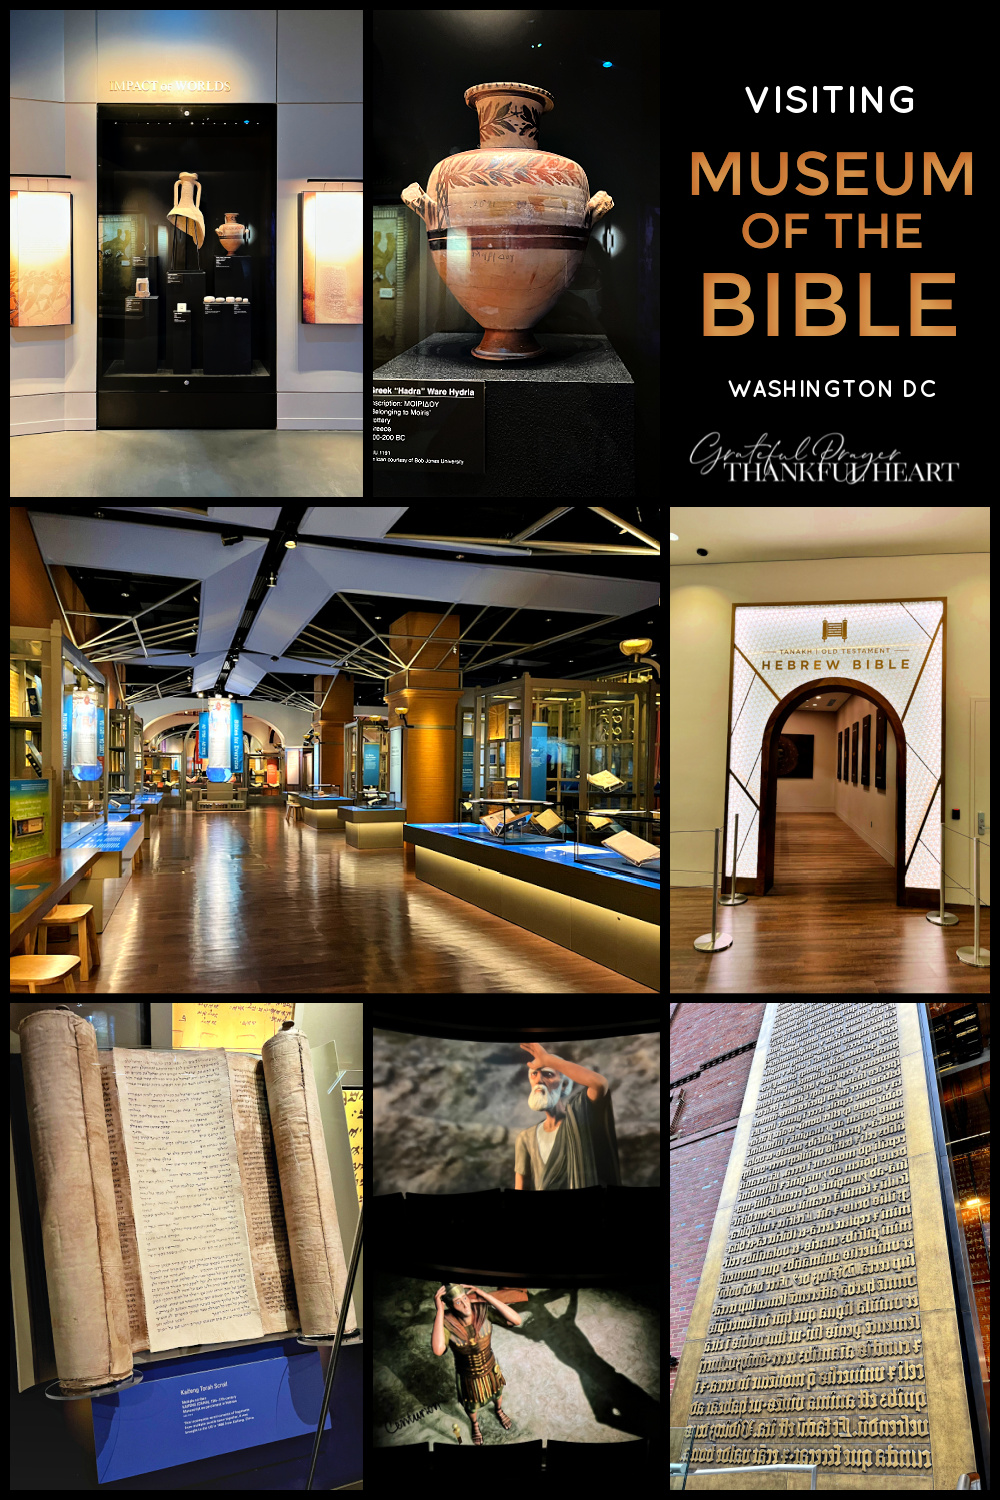 Visit Museum of the Bible, located 2 blocks from the National Mall in Washington DC sharing the narrative, history, and impact of the Bible through interactive and educational exhibits. 